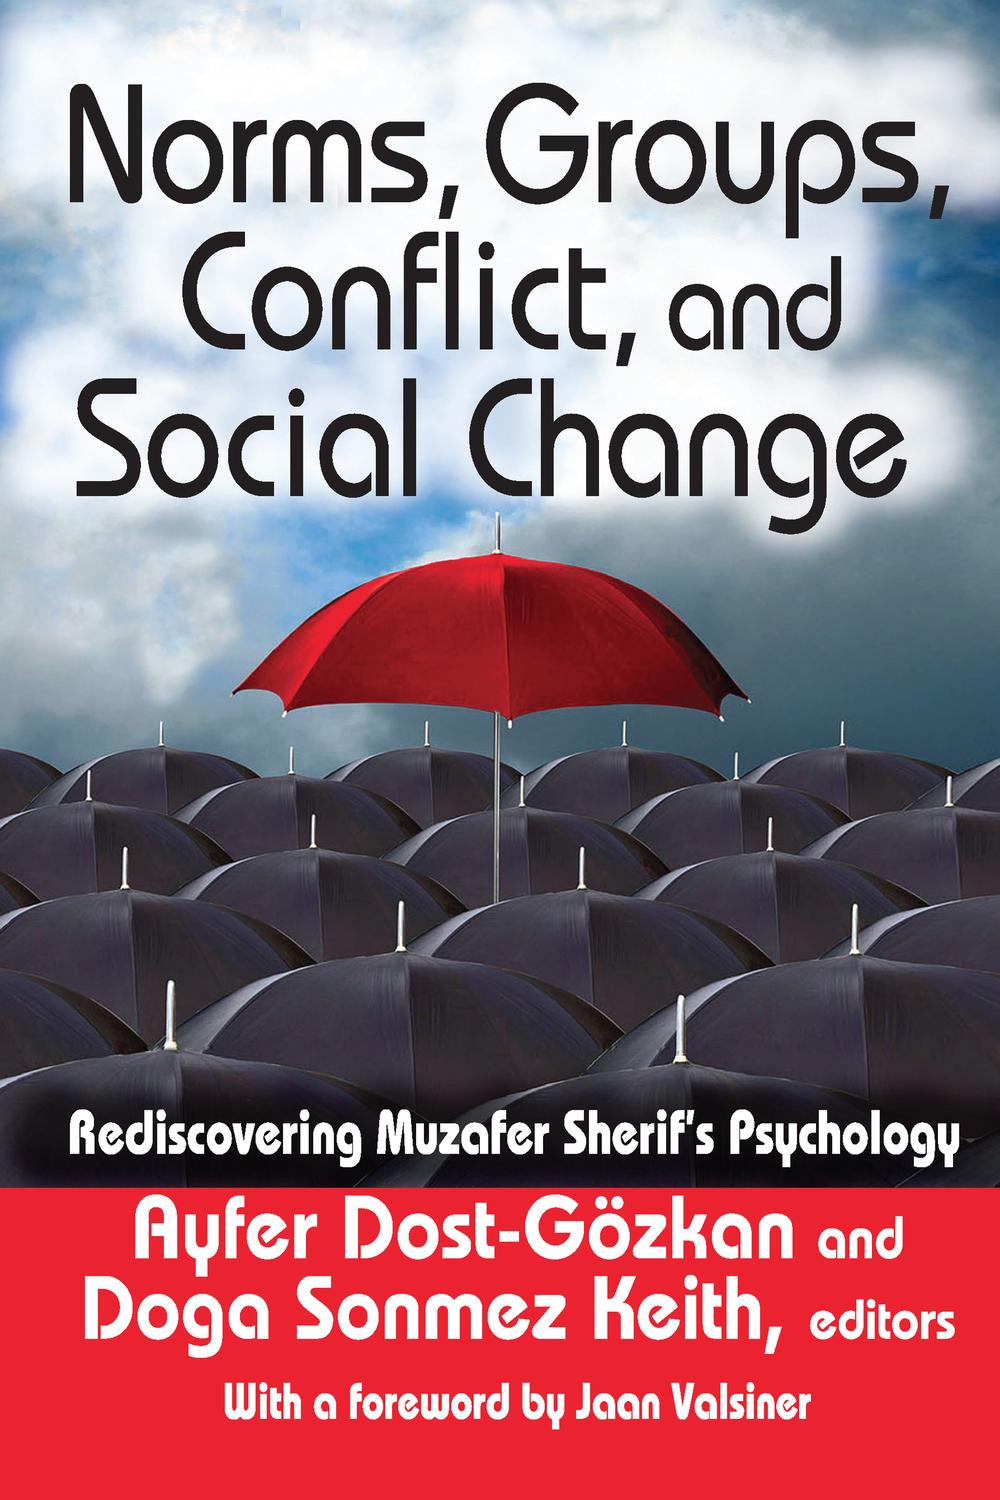 Norms, Groups, Conflict, and Social Change by Ayfer DostGozkan PDF, Read Online Perlego